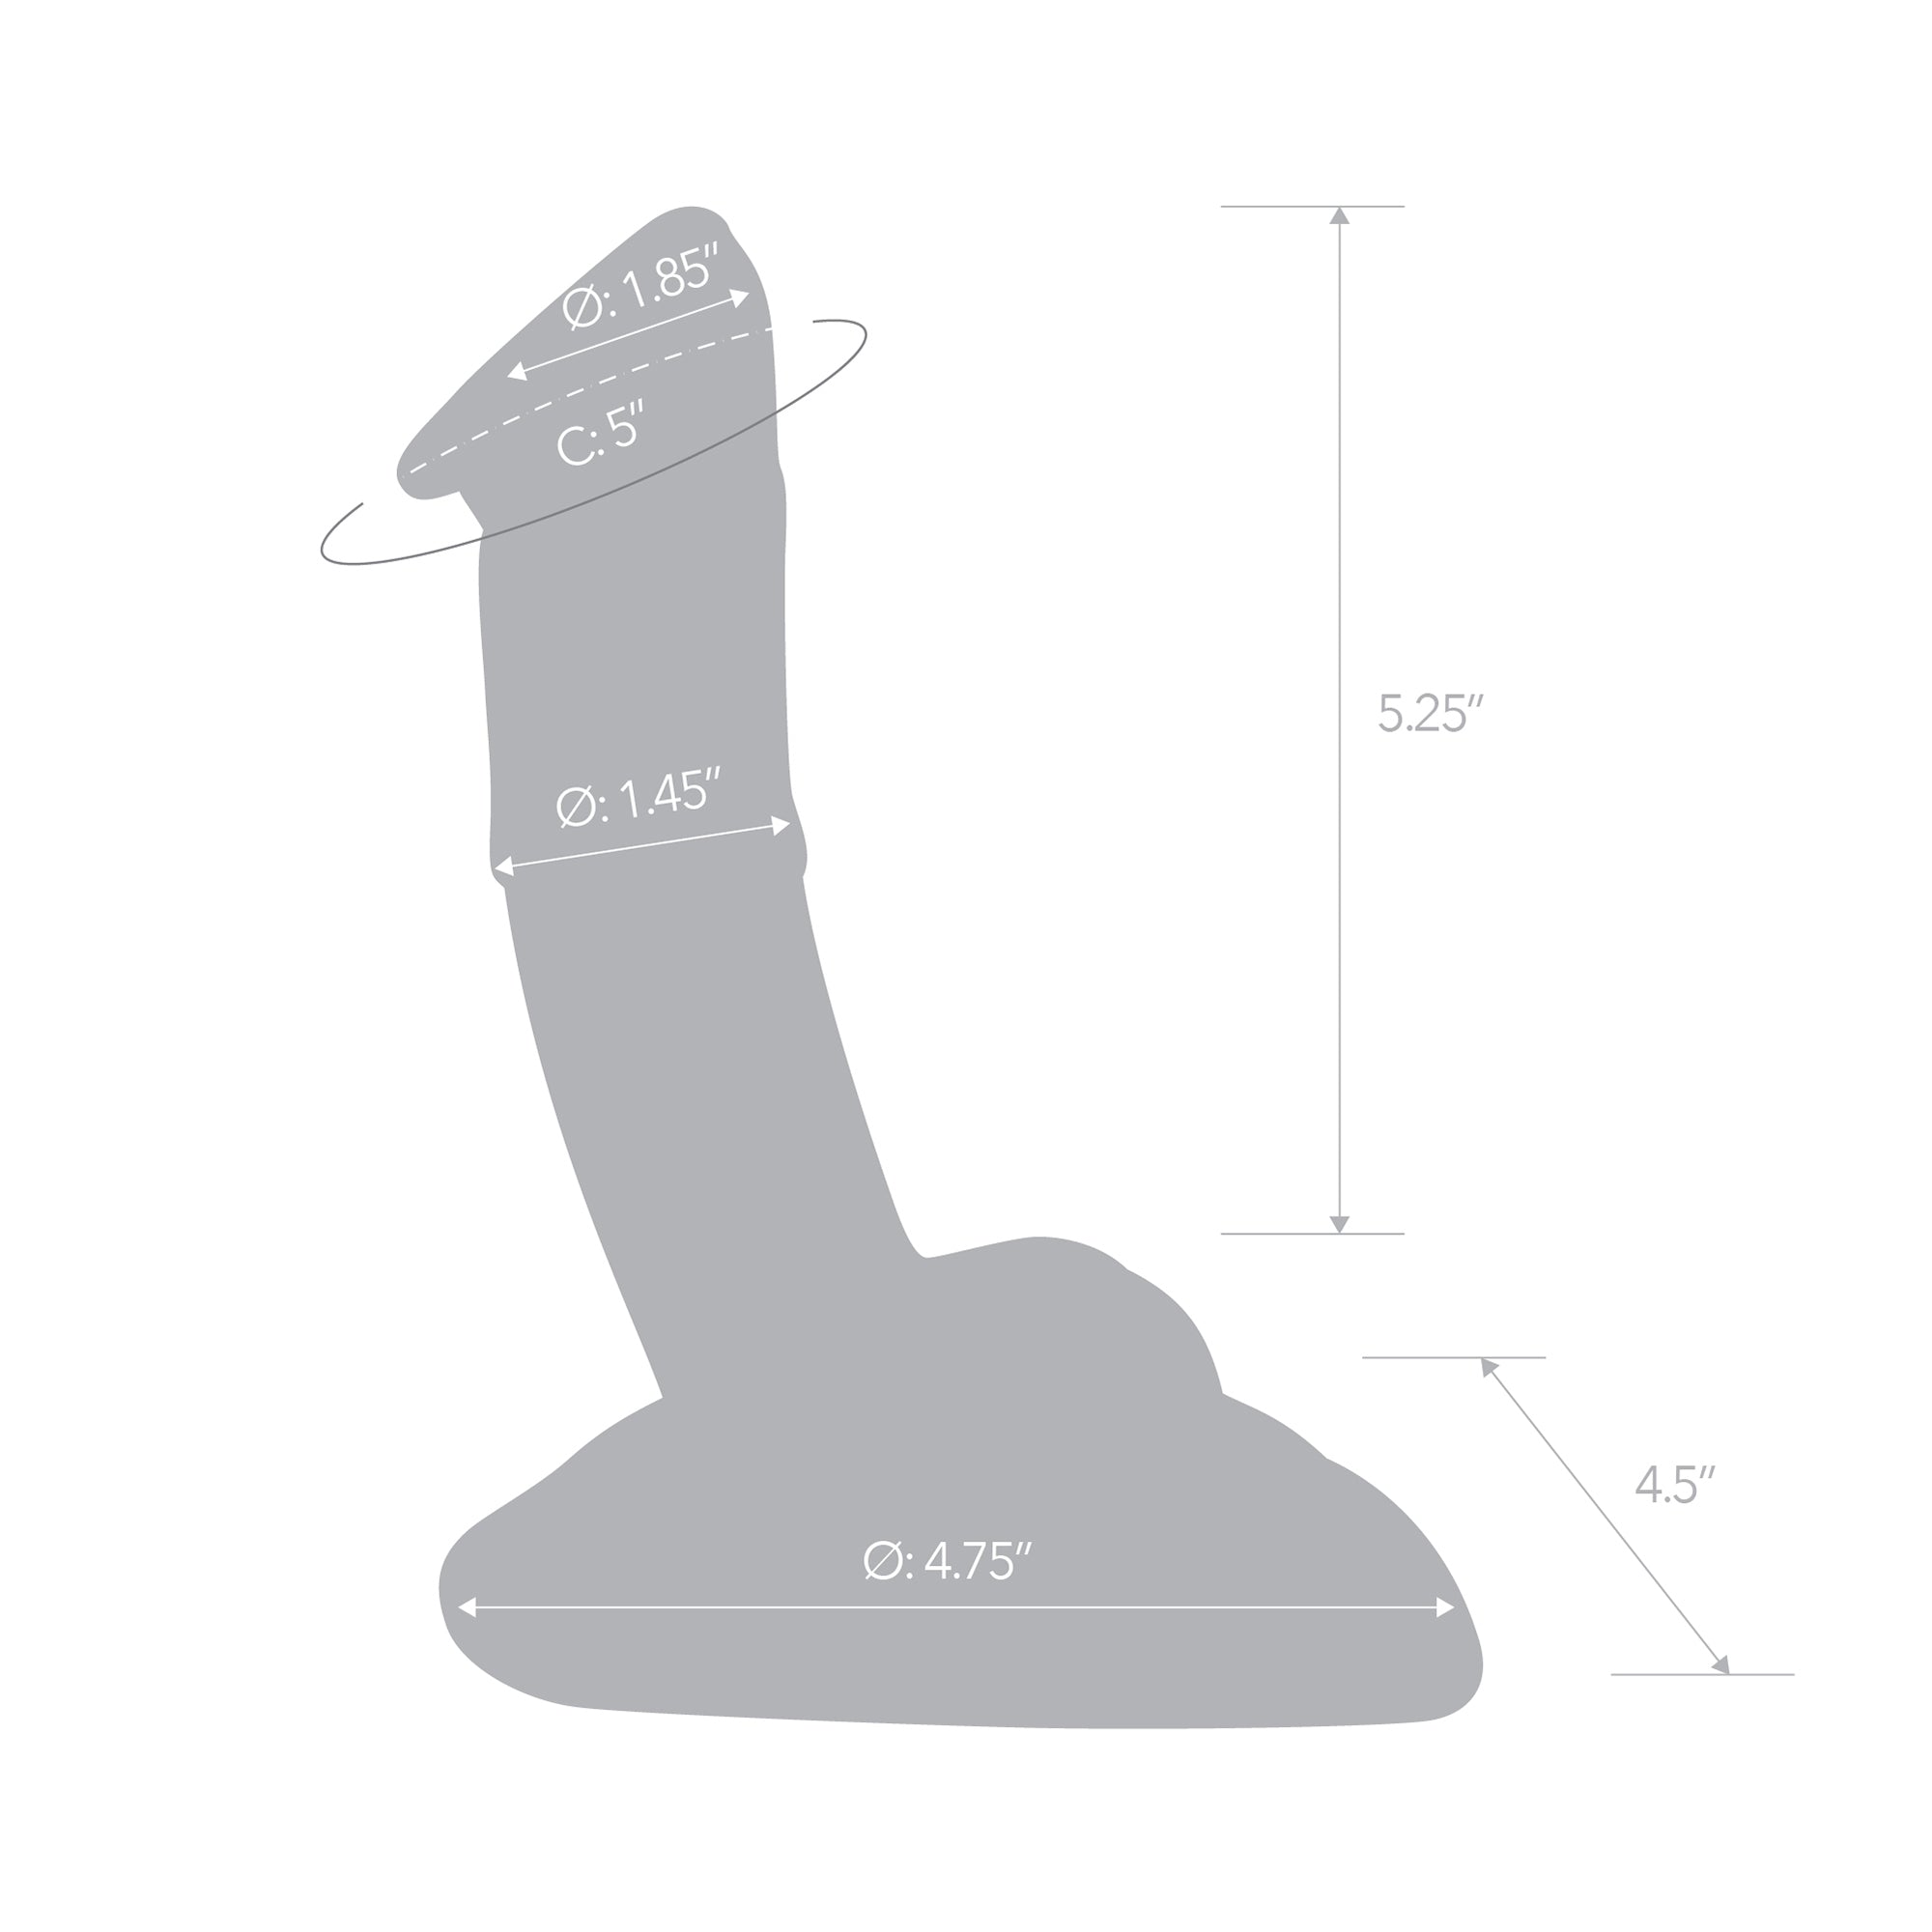 7.5" Rideable Standing Glass Cock With Stability Base